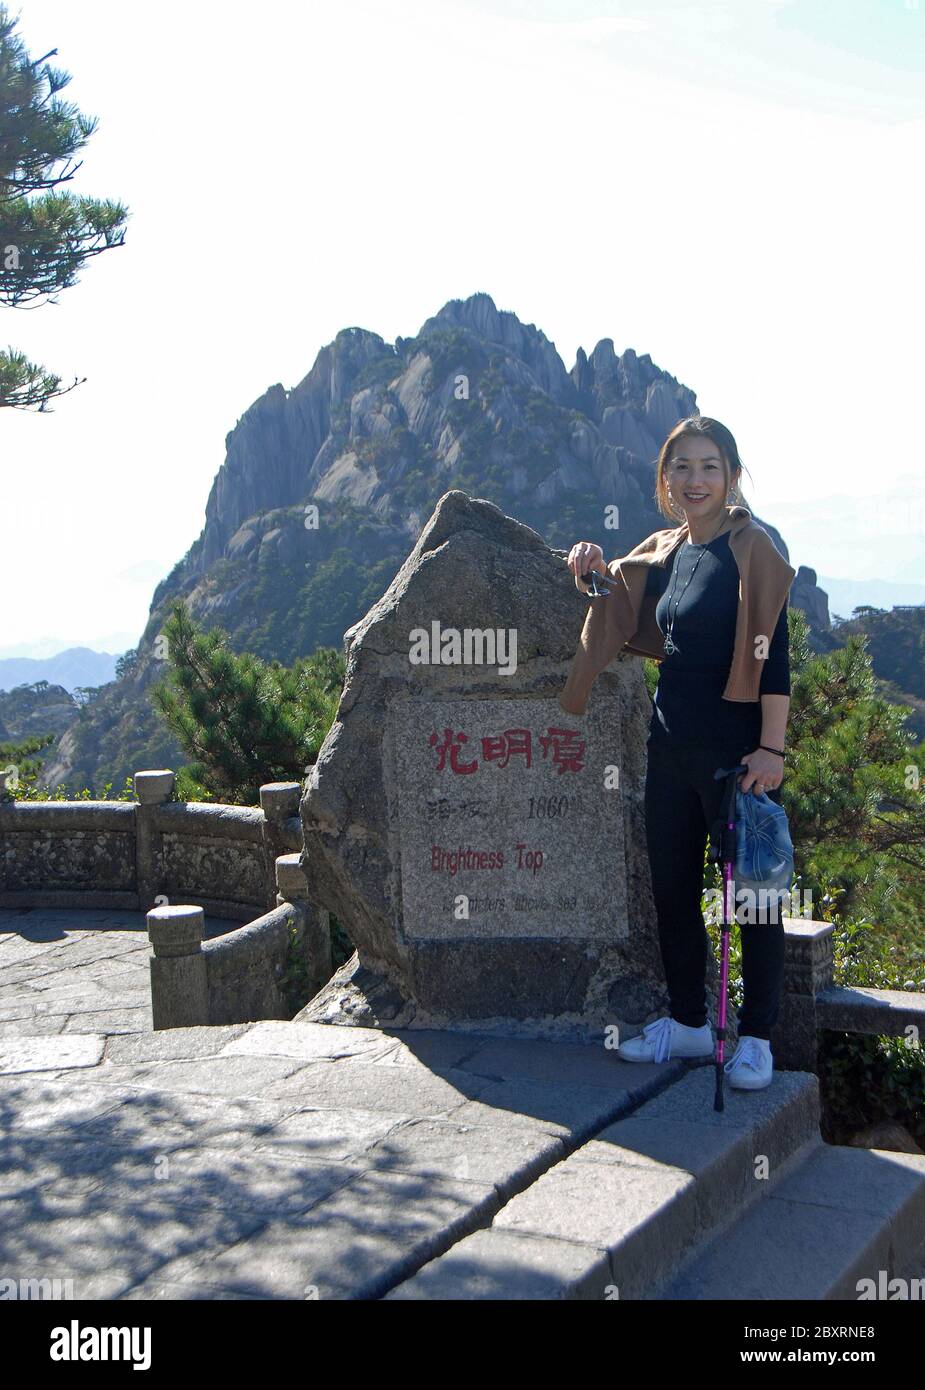 Huangshan Mountain in Anhui Province, China. Tourist photographed at the summit marker of Brightness Top. Lotus Peak, the highest peak, is behind Stock Photo